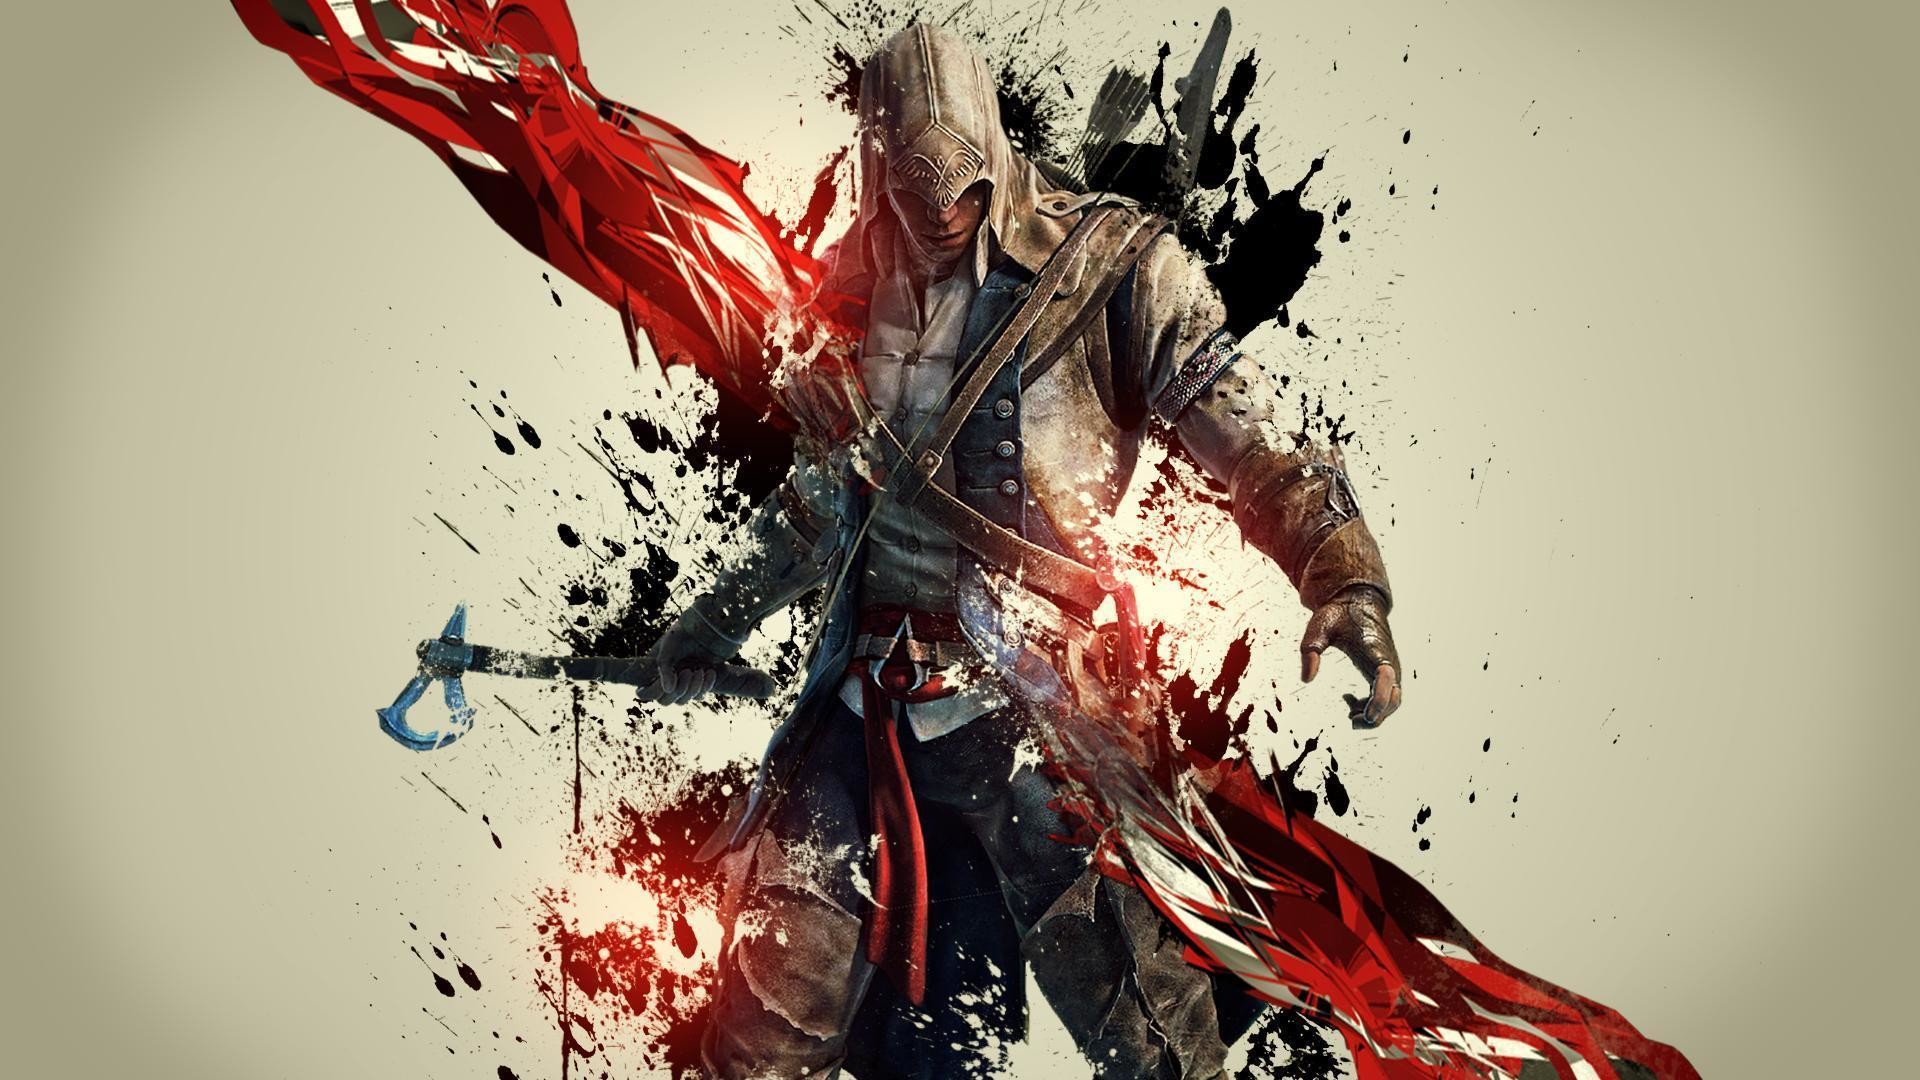 1920x1080 191 Assassin's Creed III Wallpapers | Assassin's Creed III Backgrounds